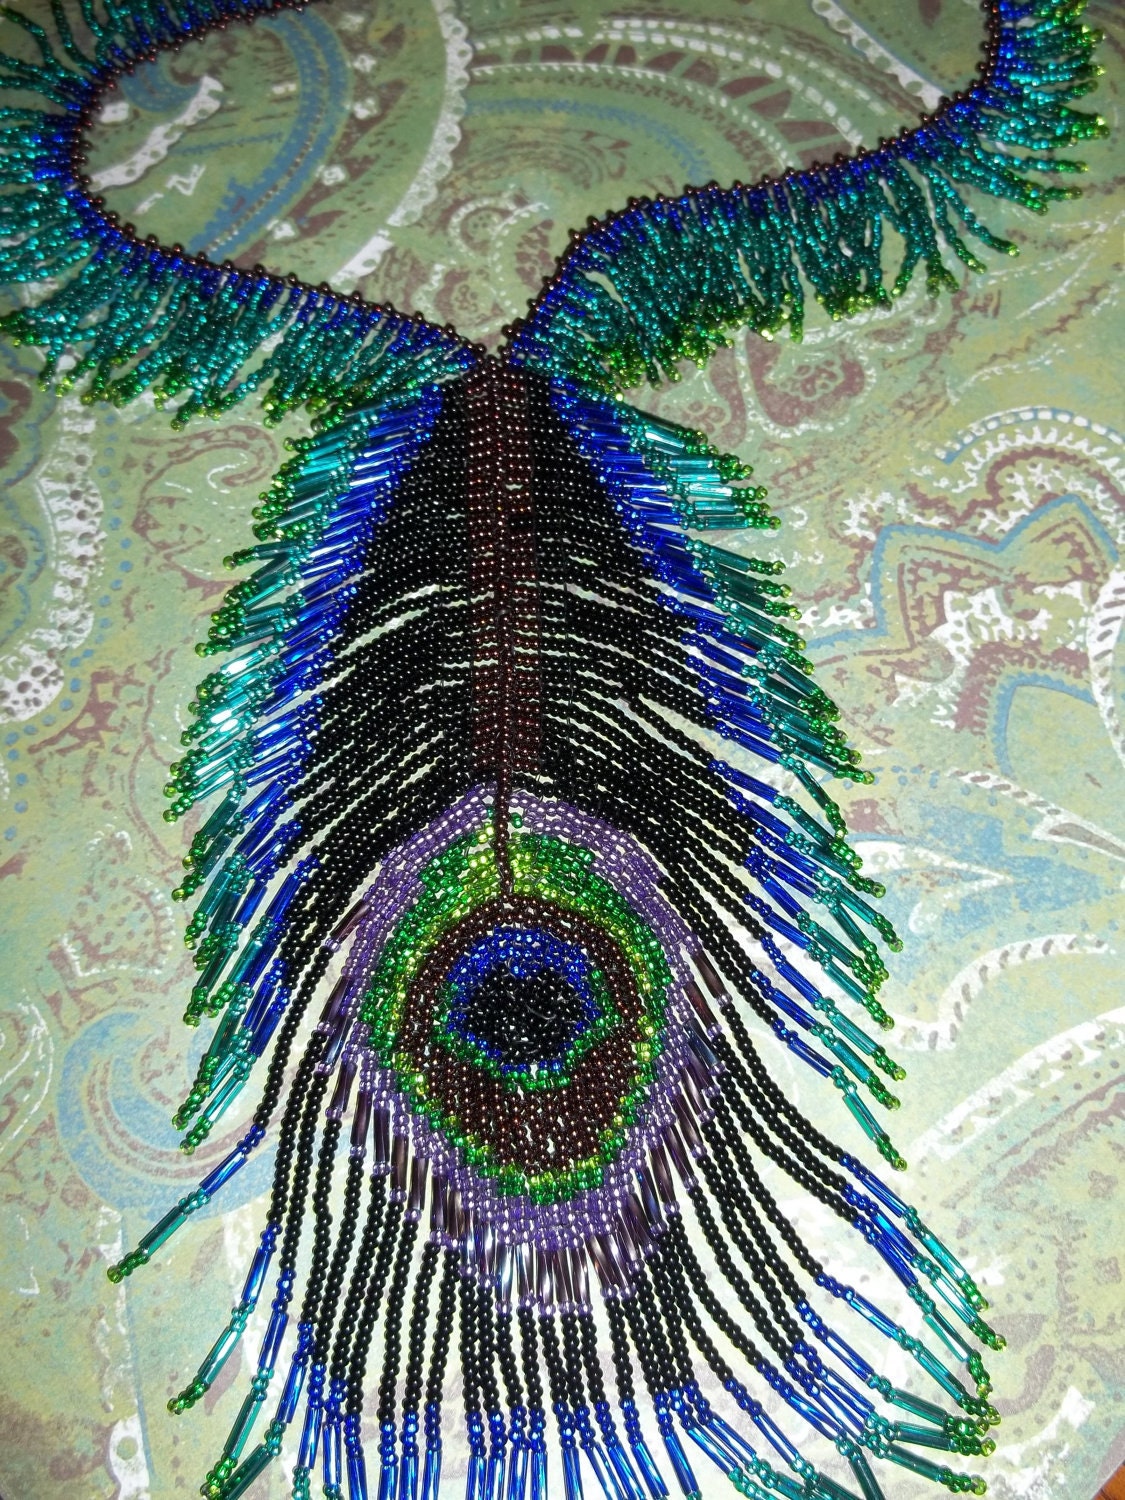 Items similar to Beaded Peacock Feather Necklace on Etsy